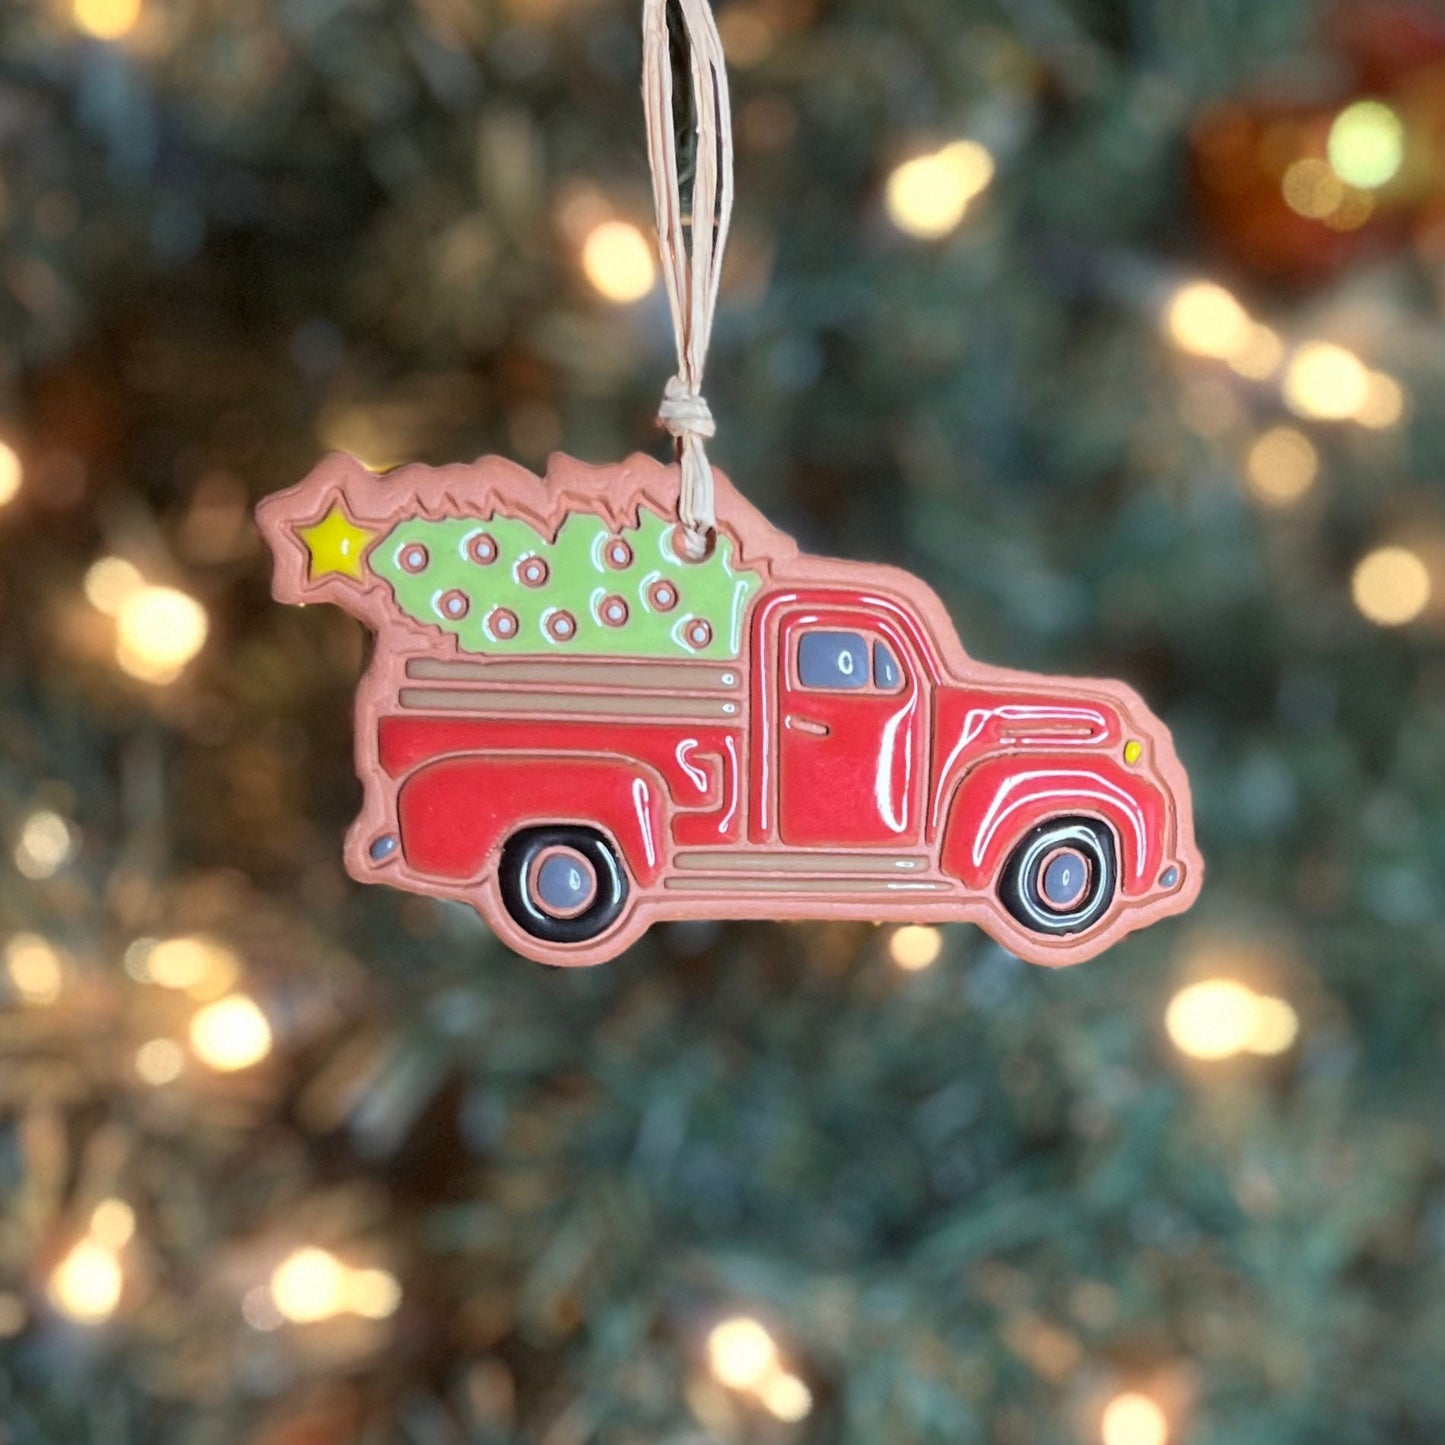 Christmas Tree Truck Ornament (color variations)